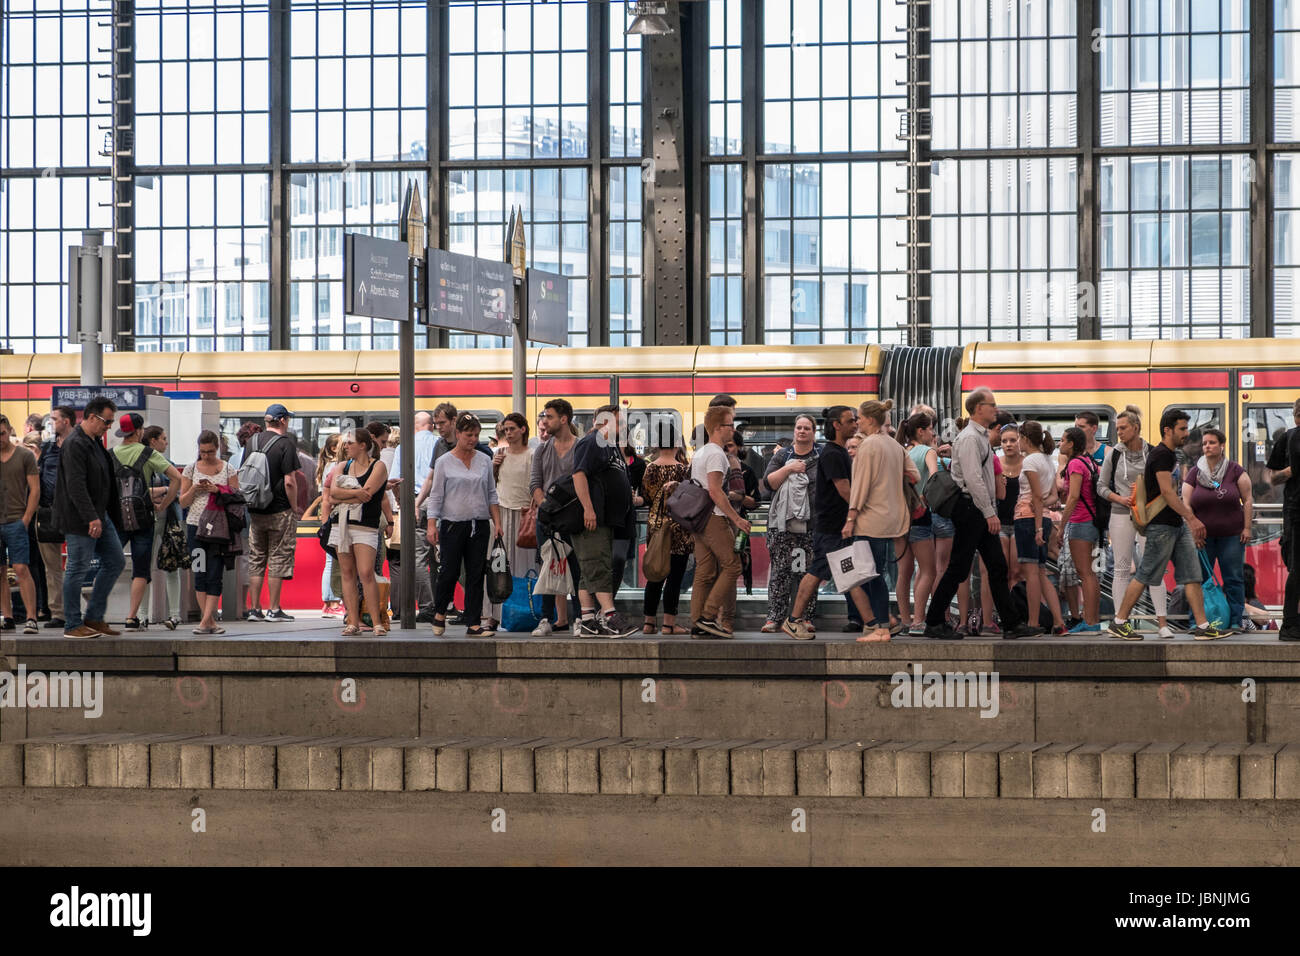 Berlin, Germany - june 9, 2017: People standing  on platform and waiting for S-Bahn train station Berlin Friedrichstrasse Stock Photo